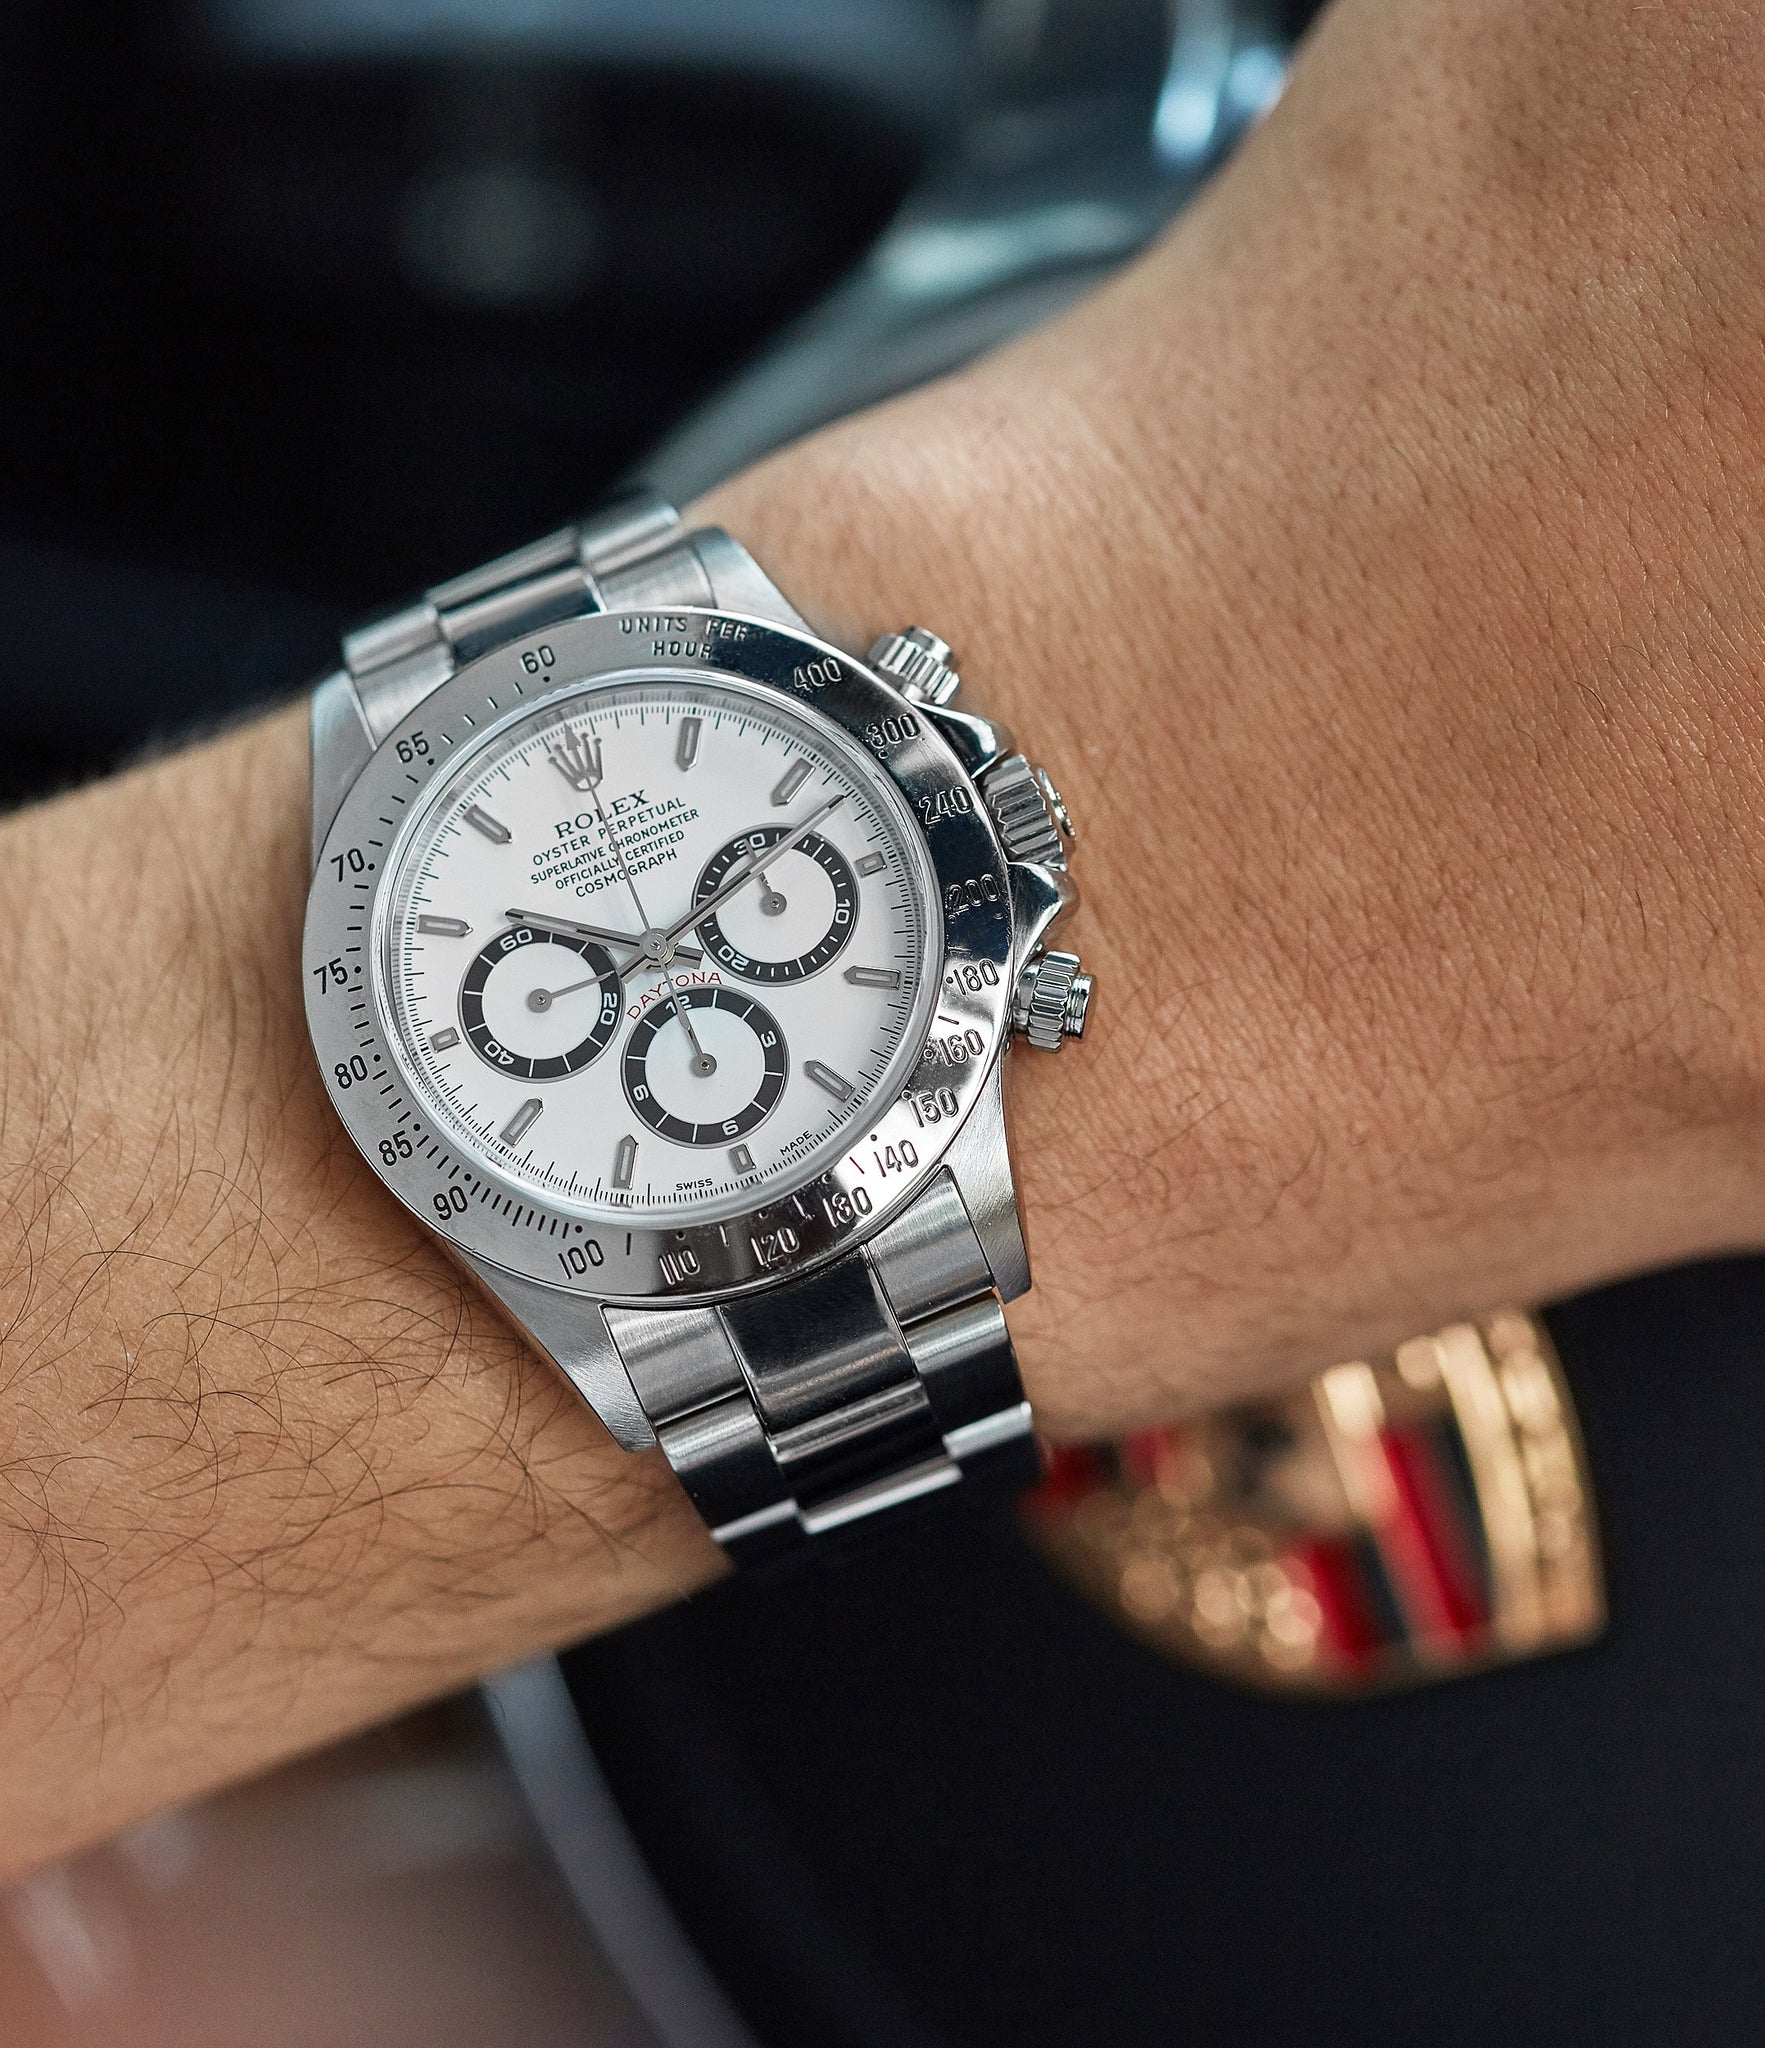 men's luxury sports watch Rolex Daytona 16520 Zenith steel vintage chronograph sports watch full set for sale online A Collected Man London specialist rare watches